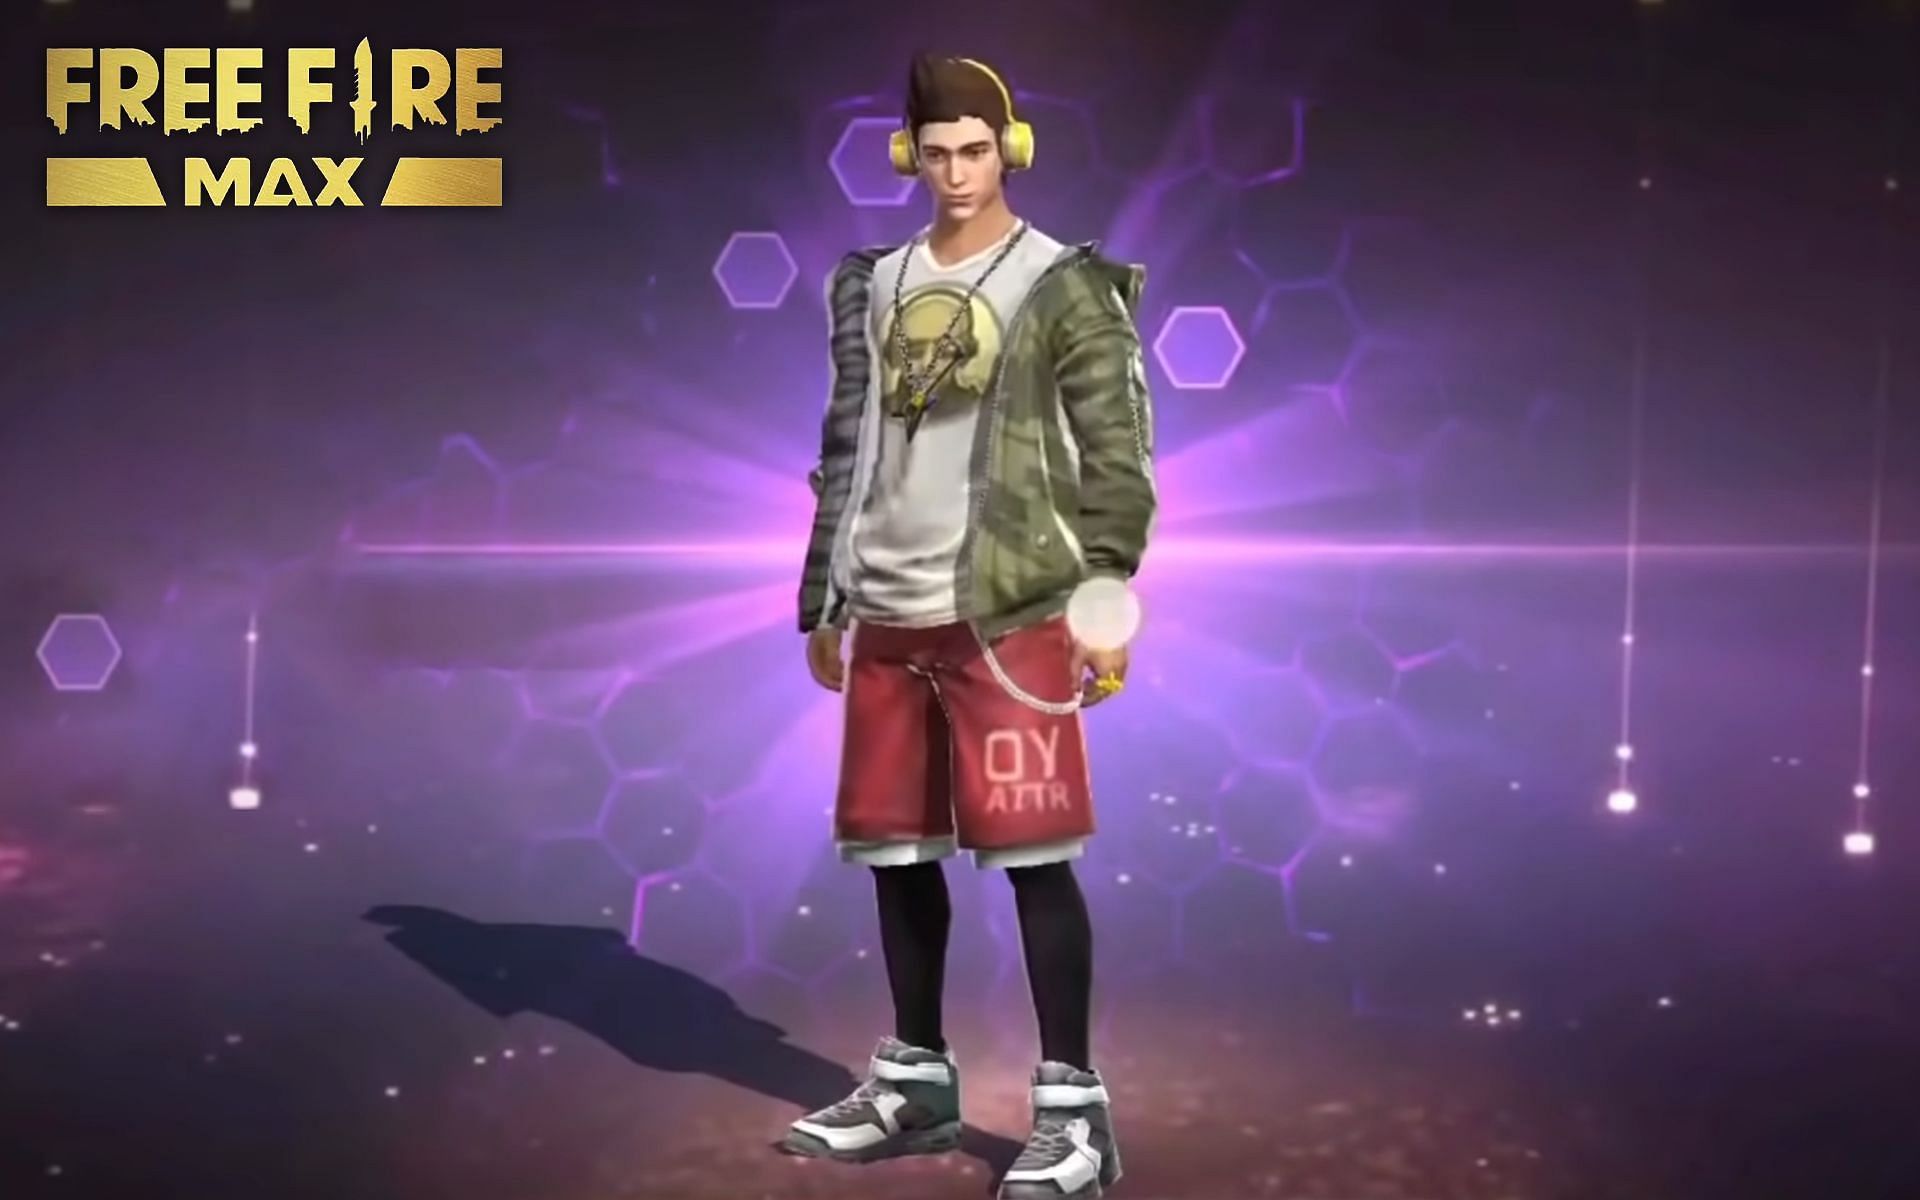 Gold Royale can be used to get costumes in Free Fire MAX (Image via Garena)